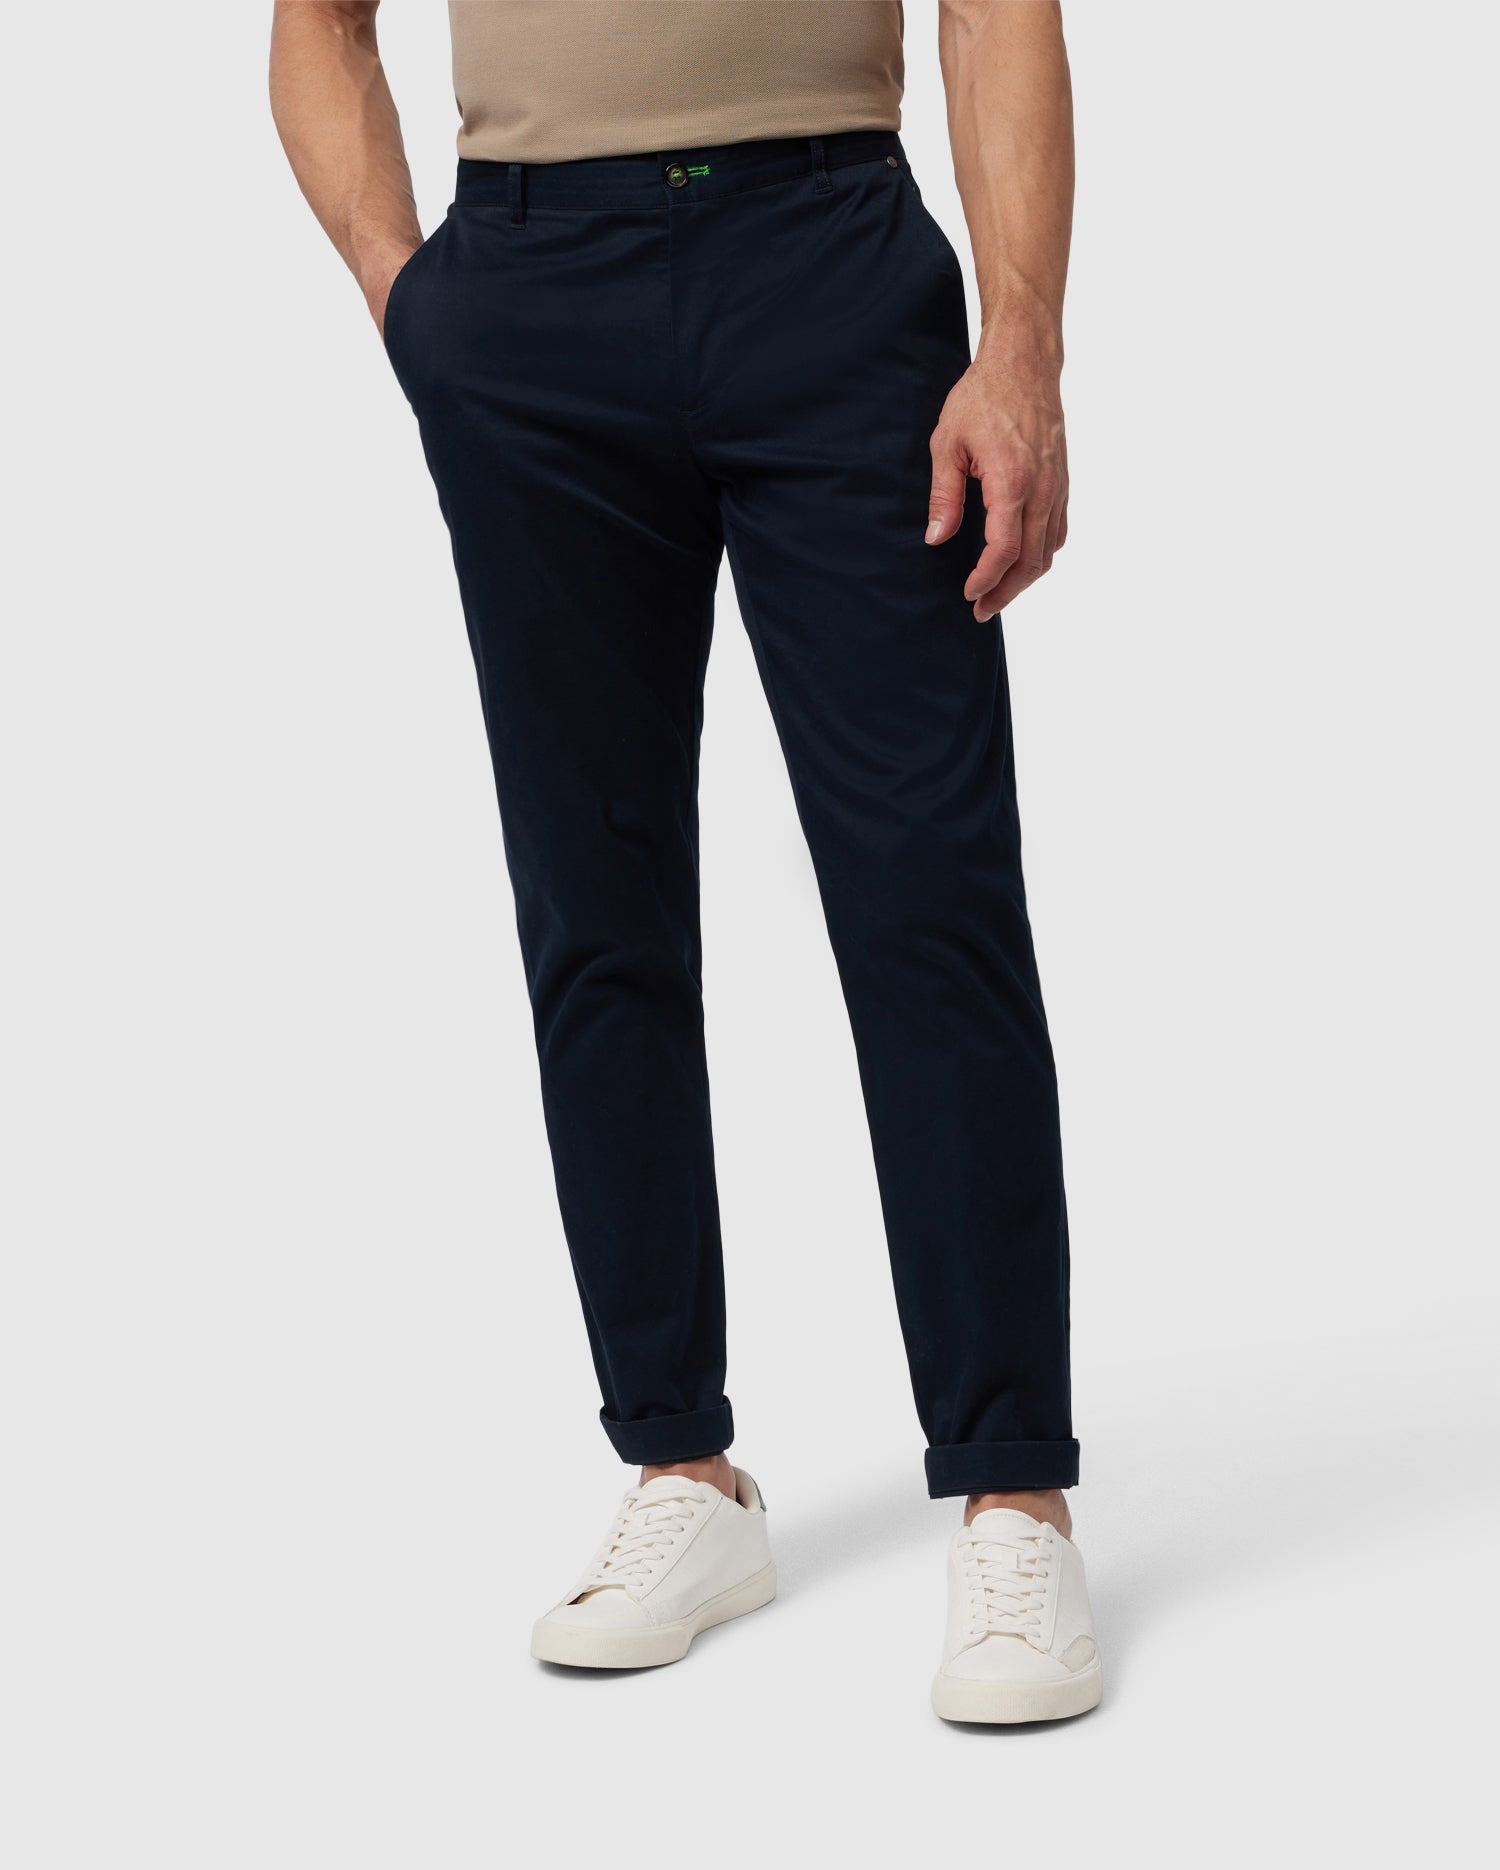 Psycho Bunny Chinos - Premium Comfort and Style in black